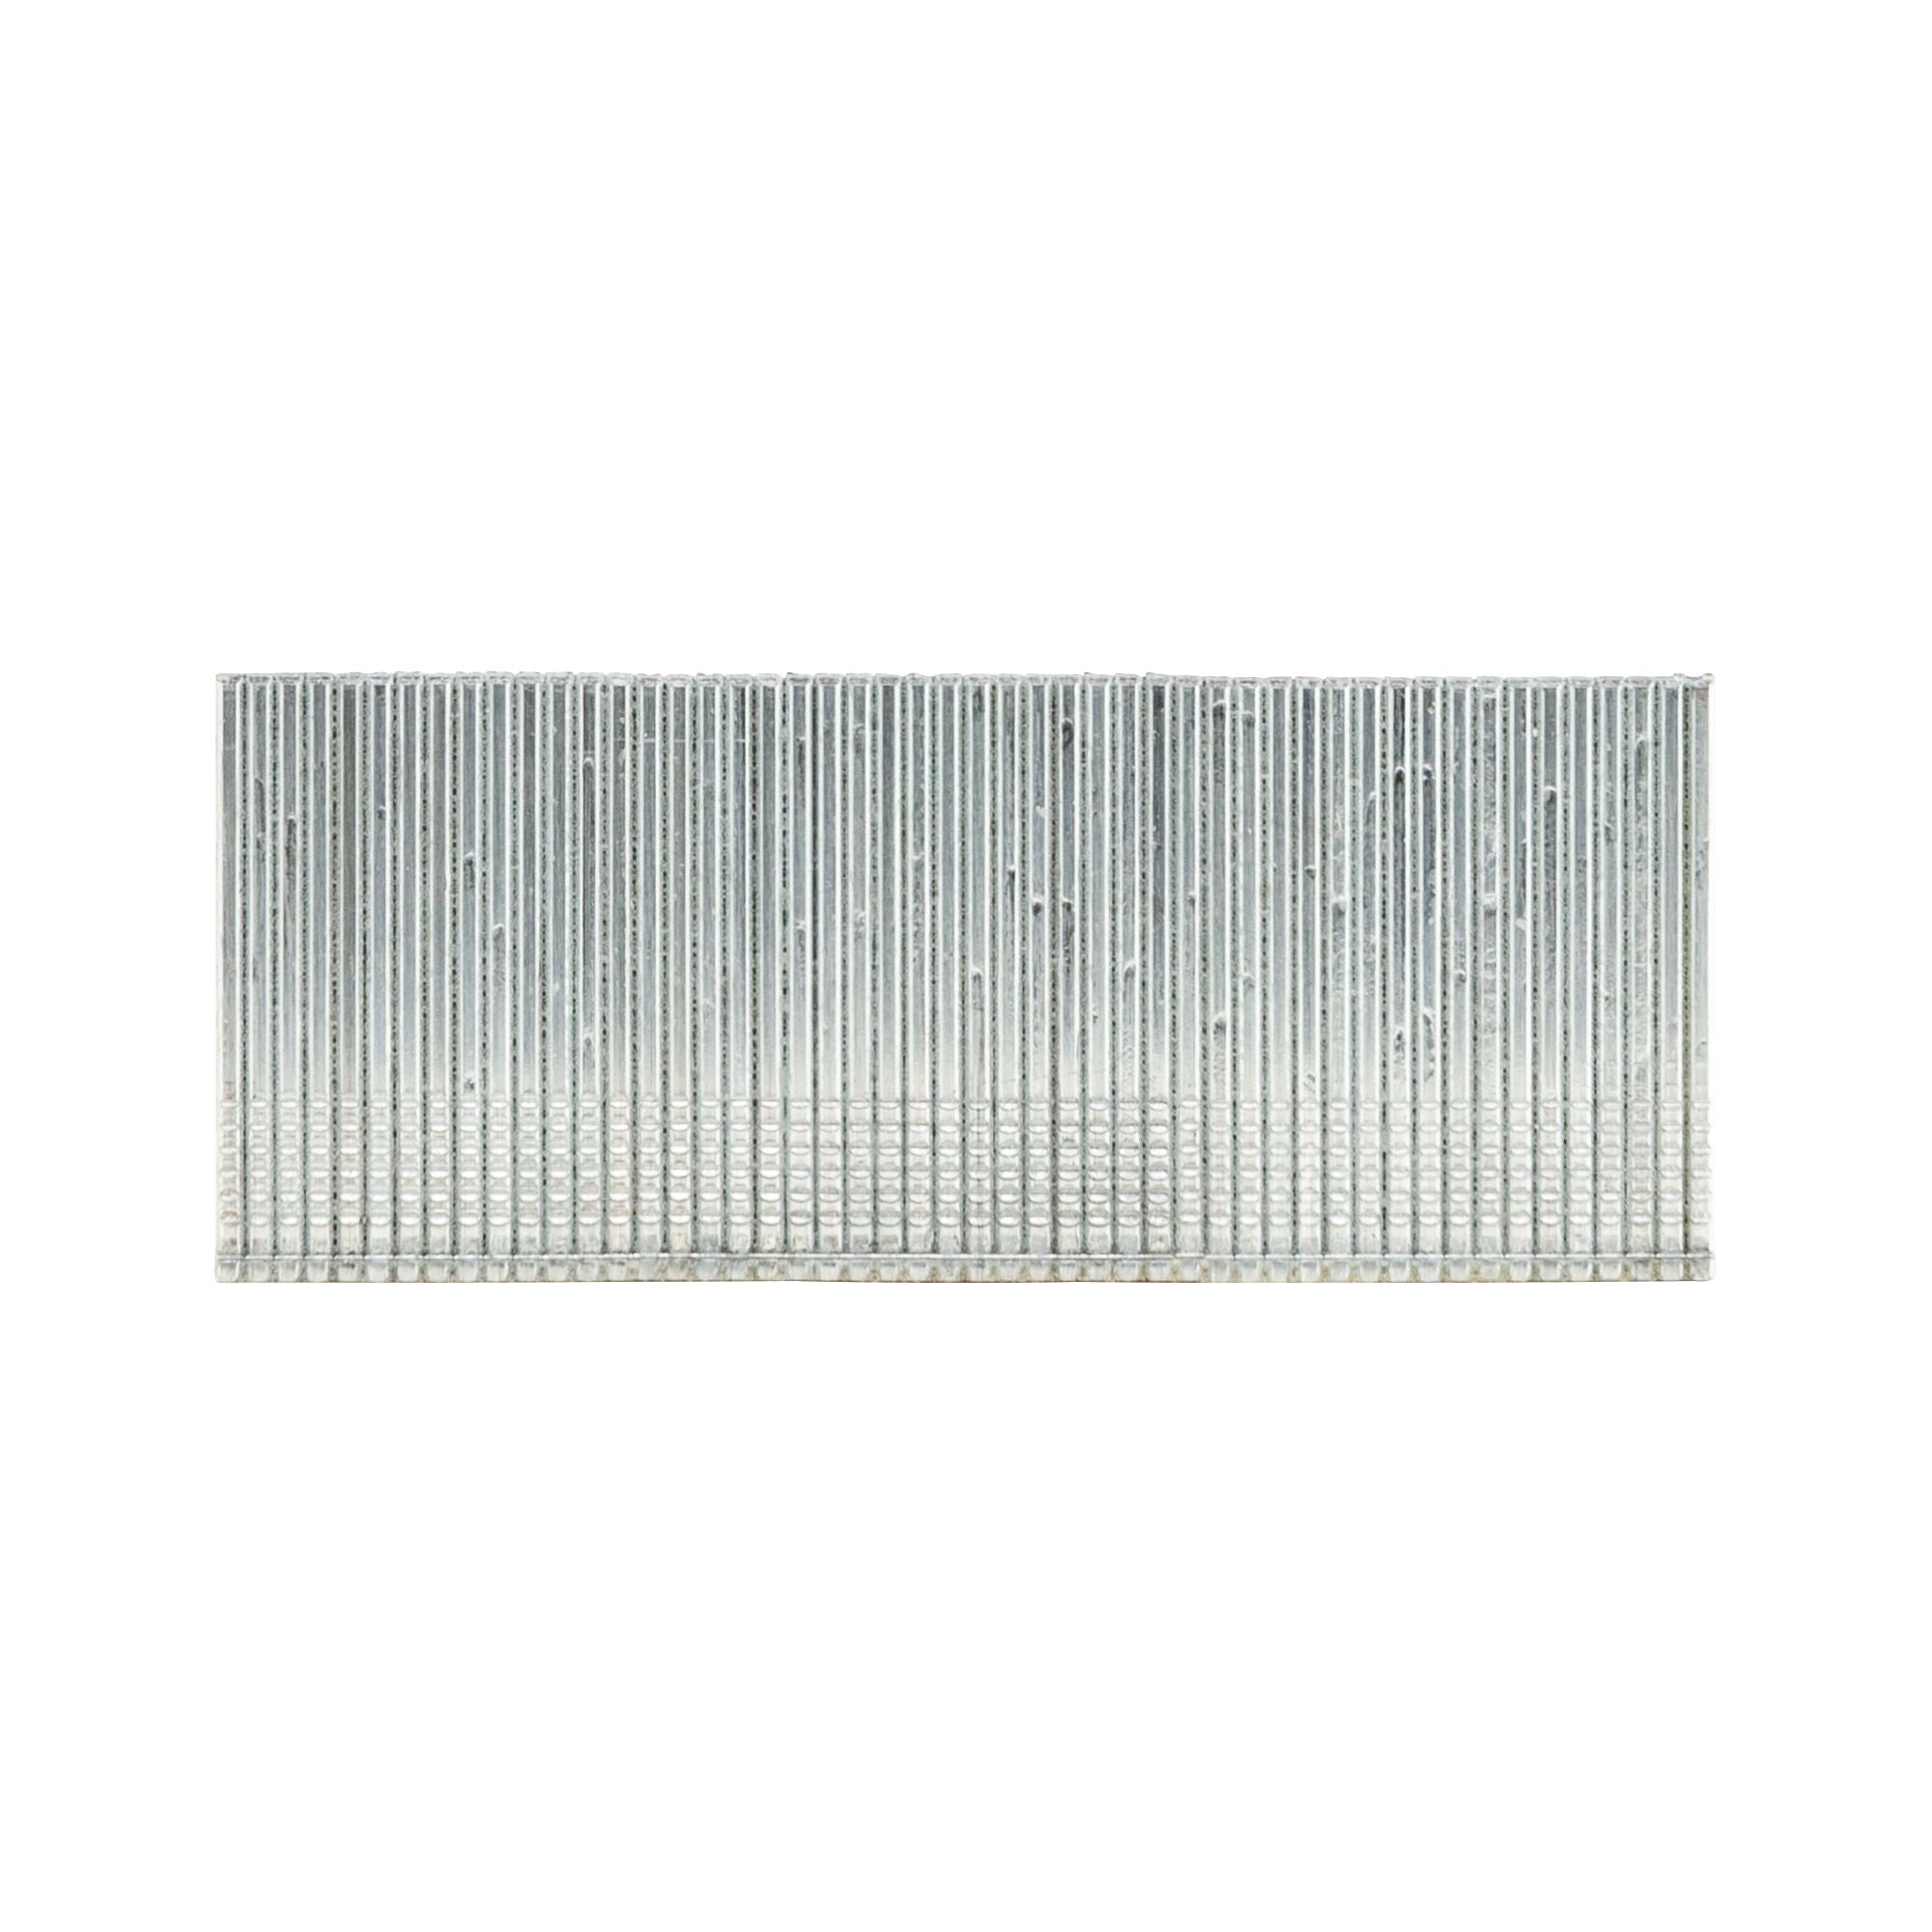 Fas-n-Tite 3-1/2-in Galvanized Finish Nails (86-Per Box) in the Brads & Finish  Nails department at Lowes.com